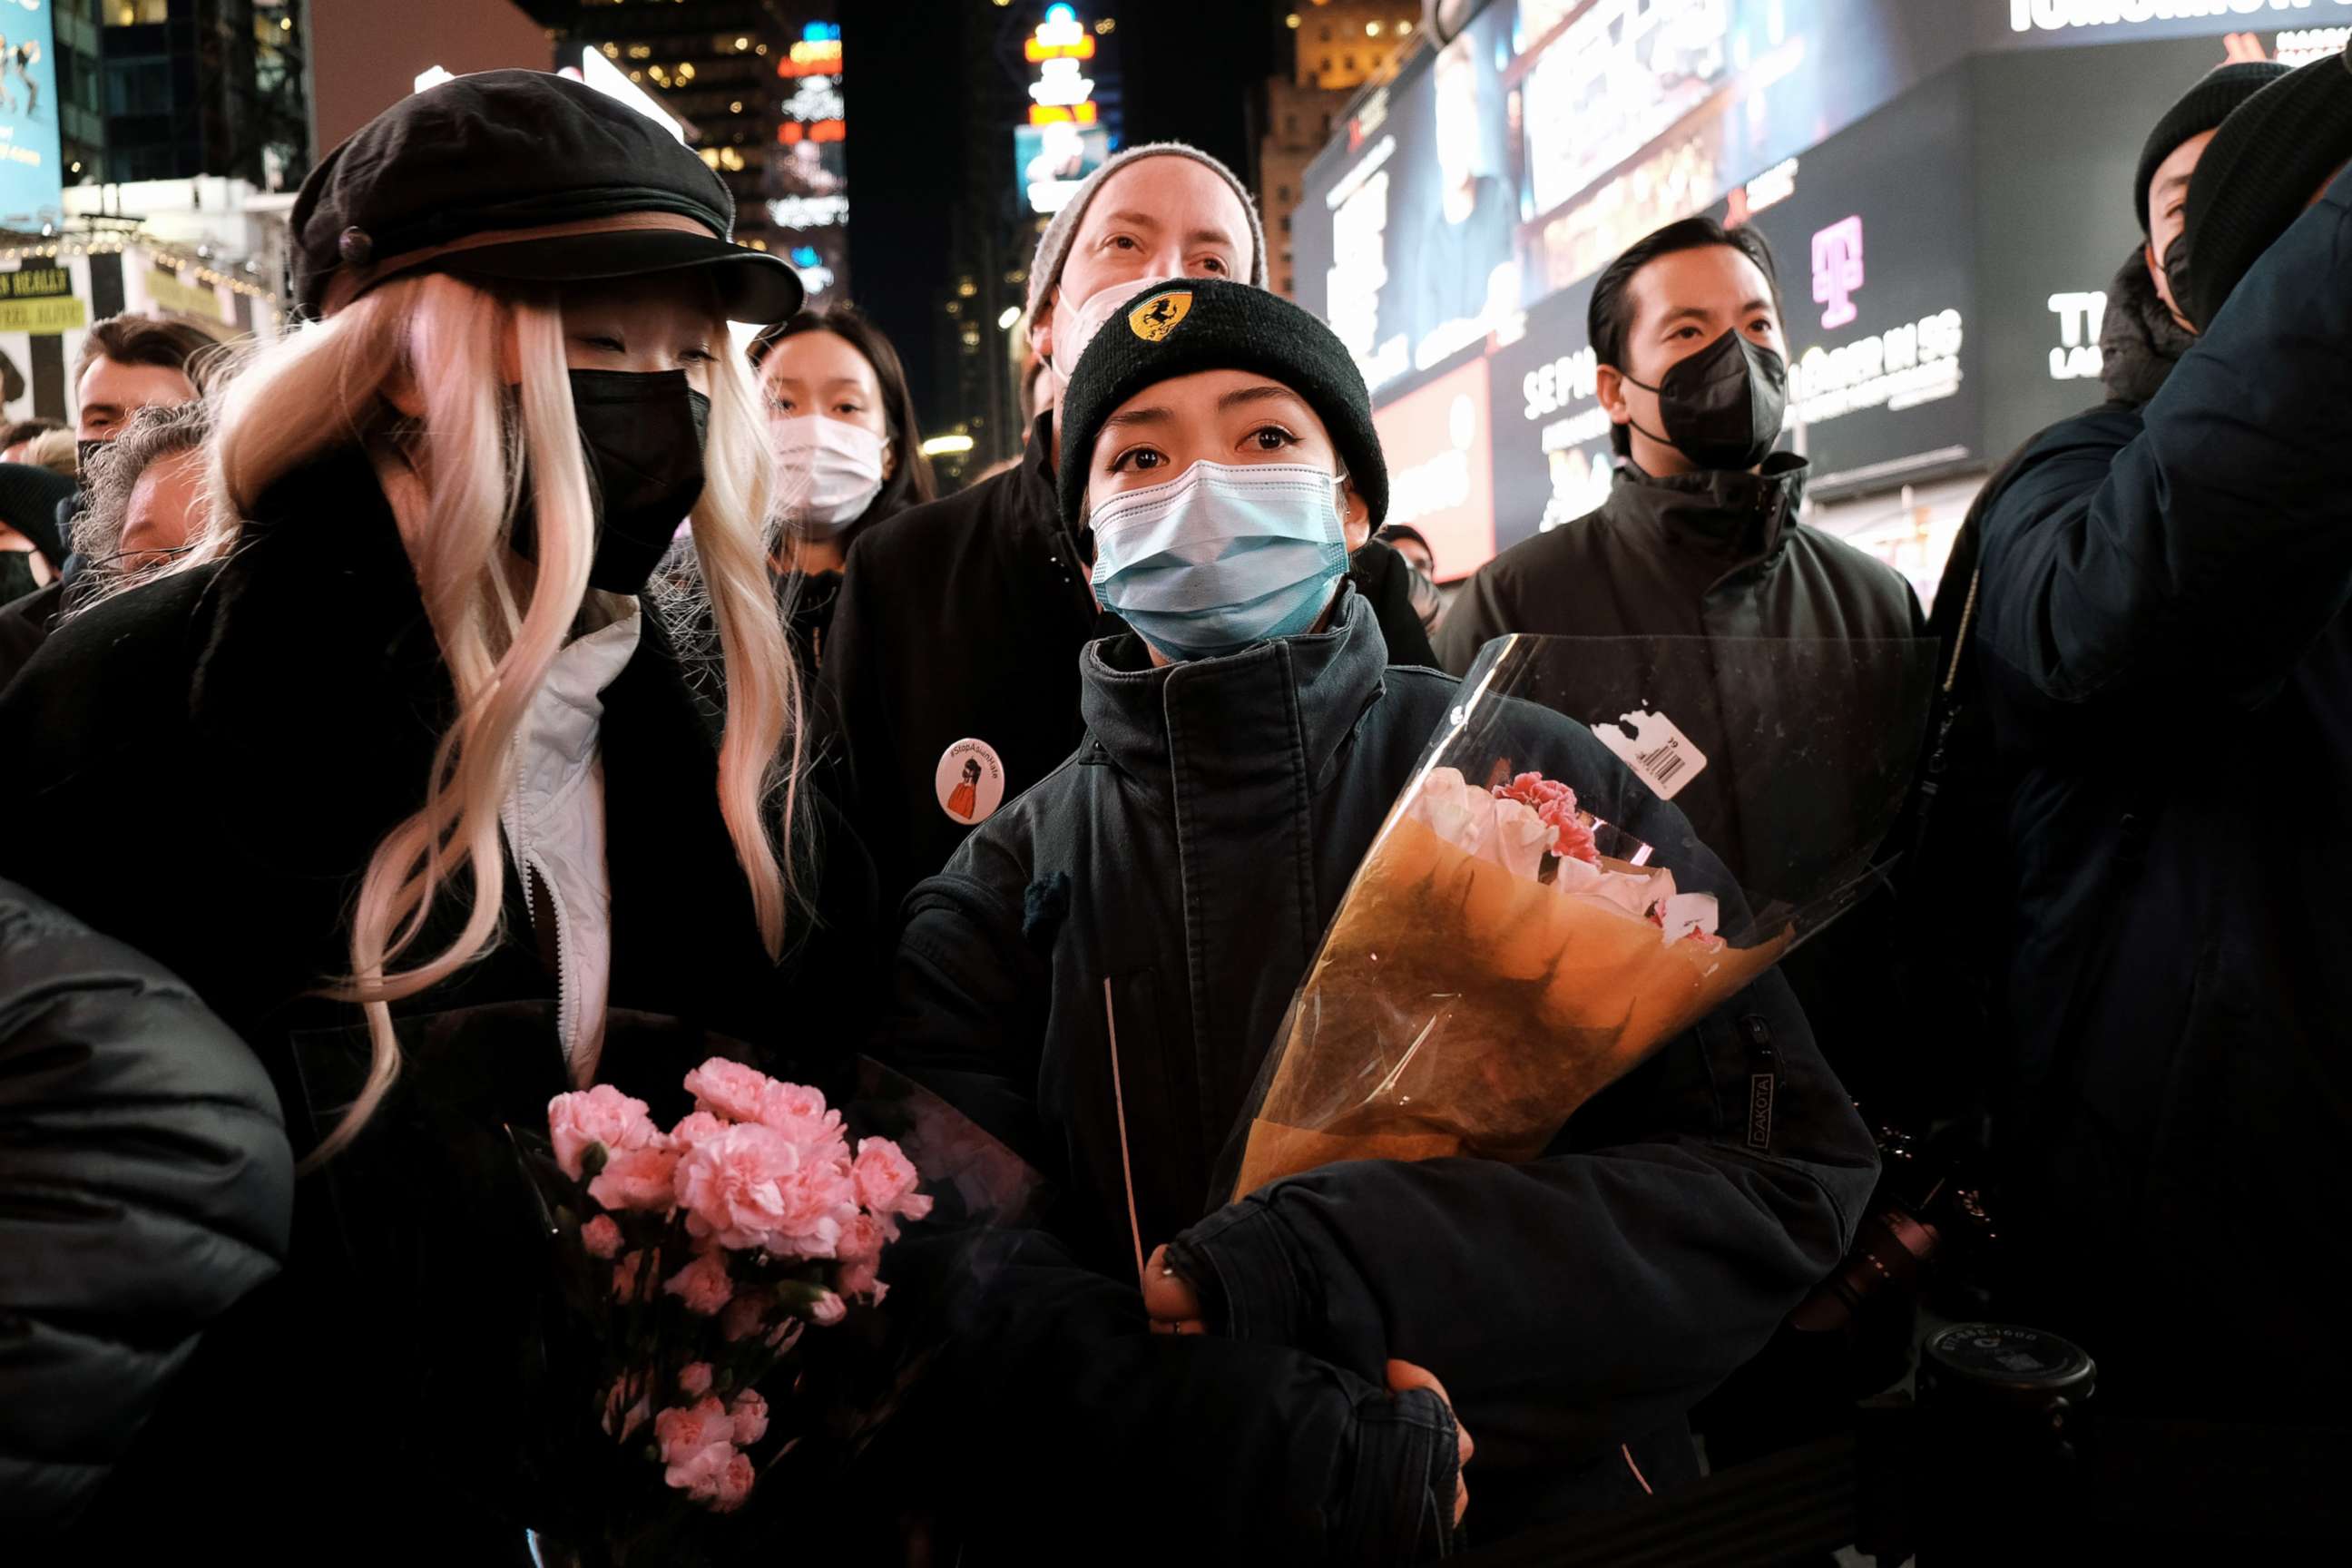 PHOTO: Local politicians, activists and members of the public attend an evening vigil for Michelle Go, who was killed on Jan. 18, 2022 in New York City. Go was pushed by a stranger in front of a train at the Times Square subway station.